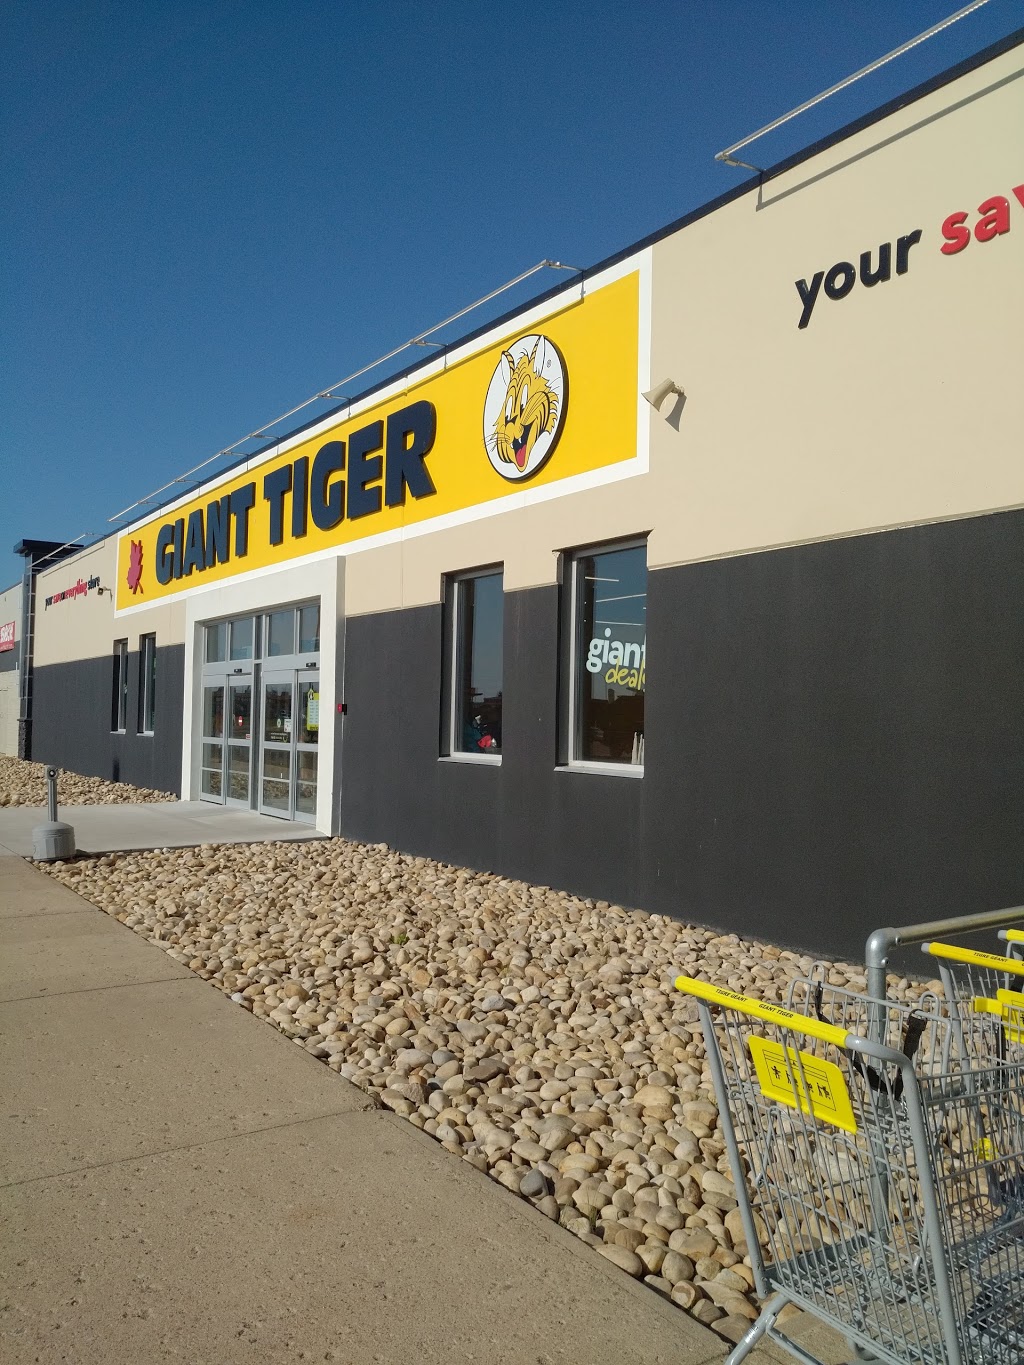 Giant Tiger | department store | 3725 56 St, Wetaskiwin, AB T9A 2V6, Canada | 5874680903 OR +1 587-468-0903